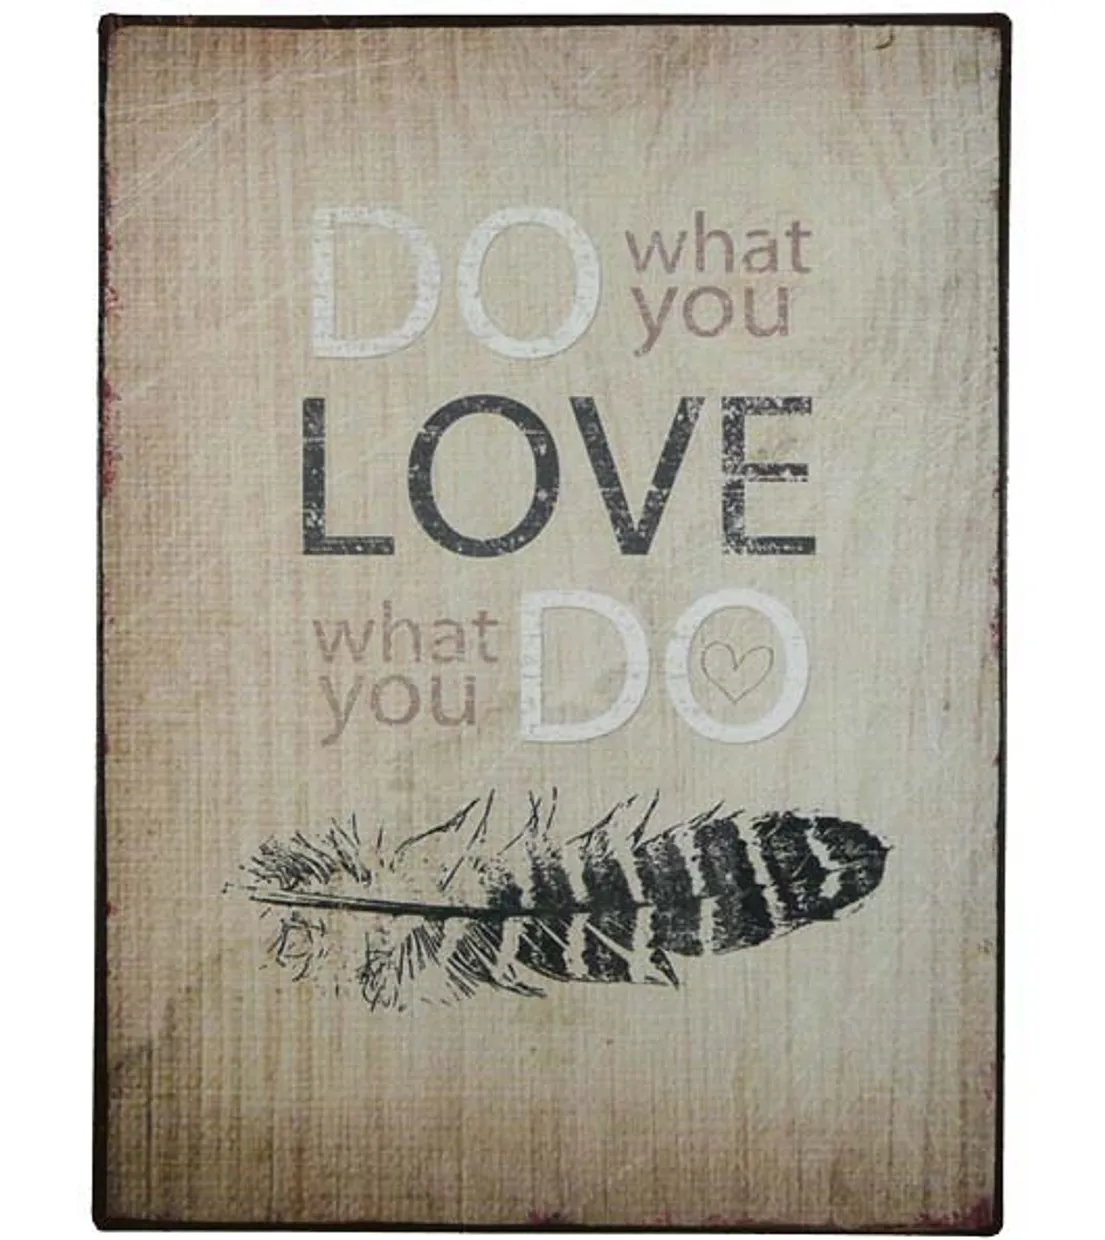 Tekstbord: "Do what you love ......."